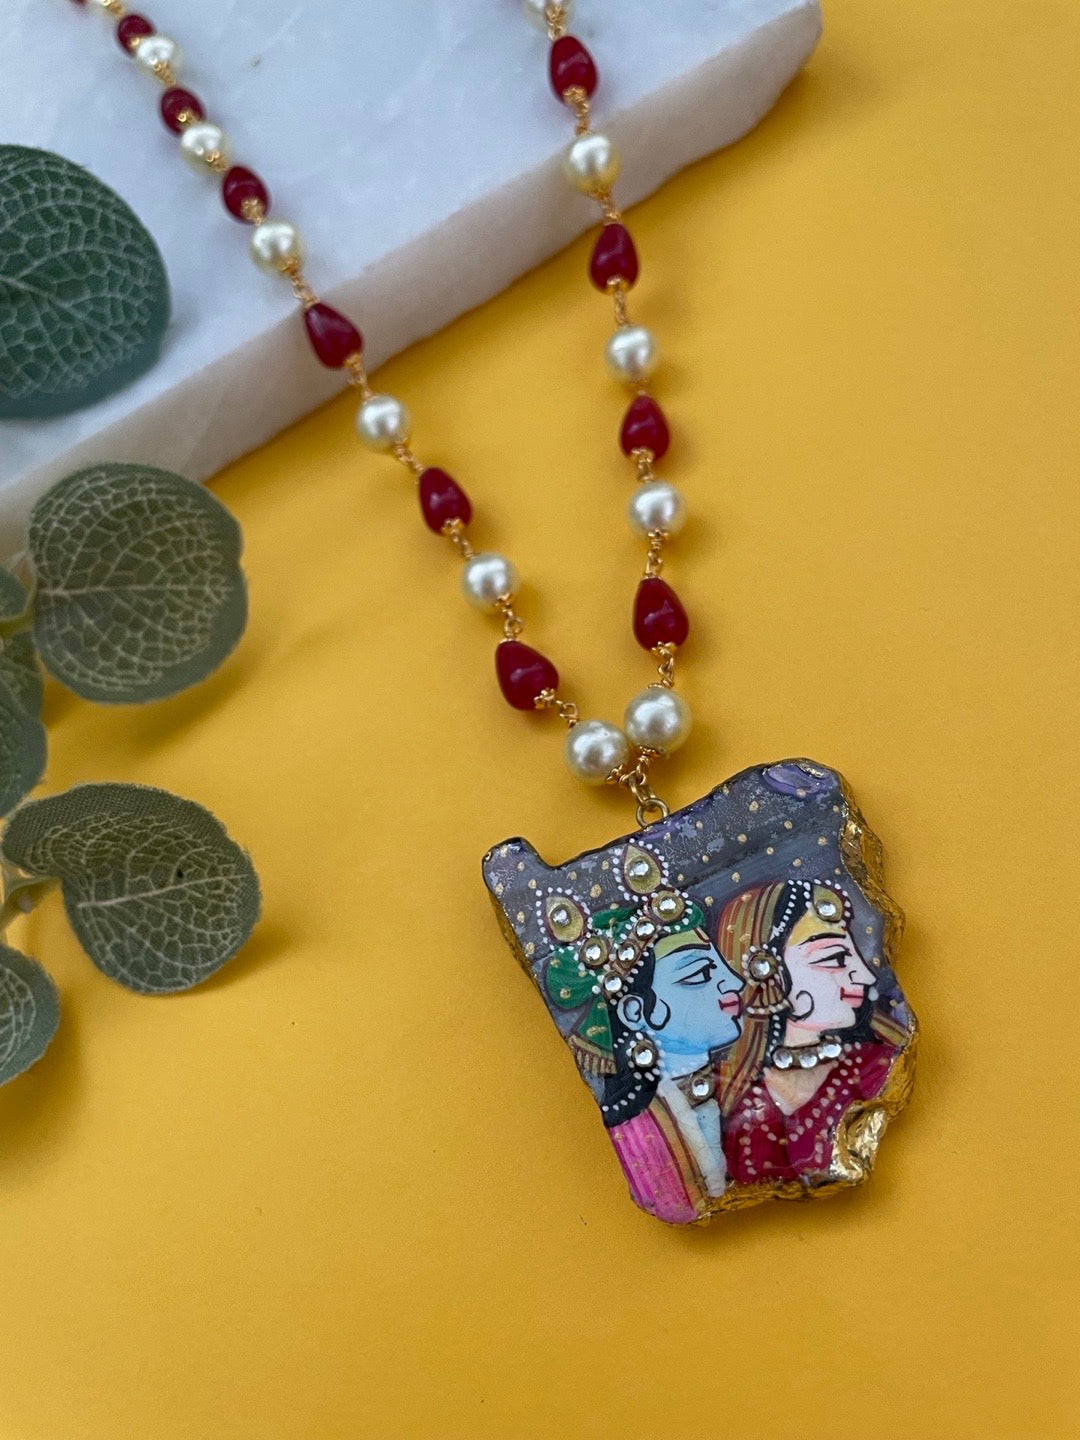 Unique Beautiful Multi Color Hand-Painted Radha Krishna Pendent Necklace with Red Beads & White Pearls